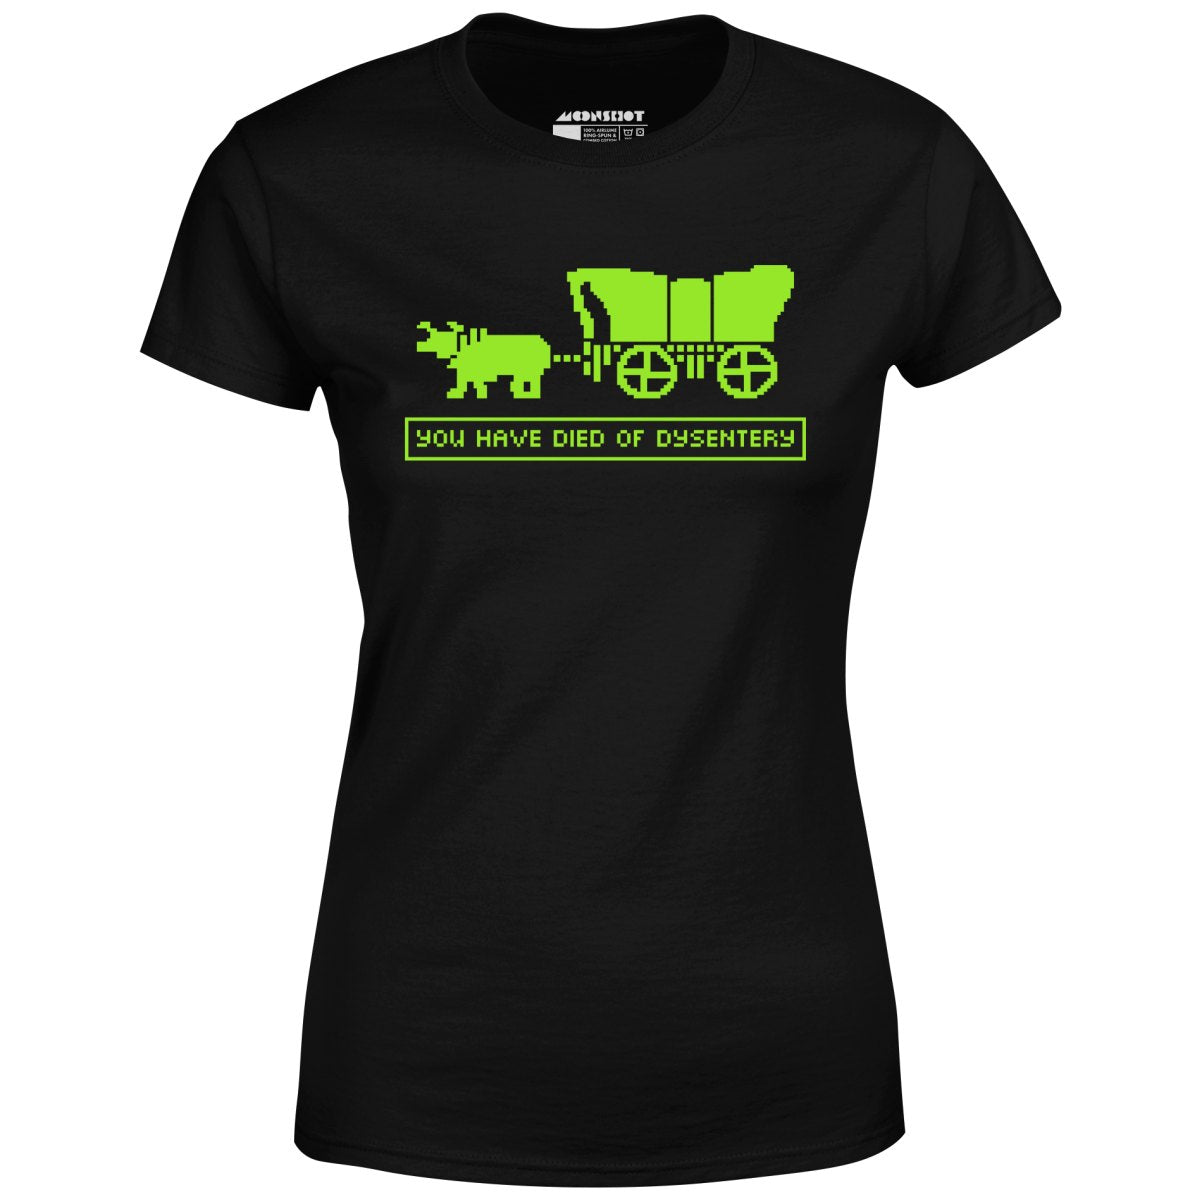 You Have Died of Dysentery - Women's T-Shirt